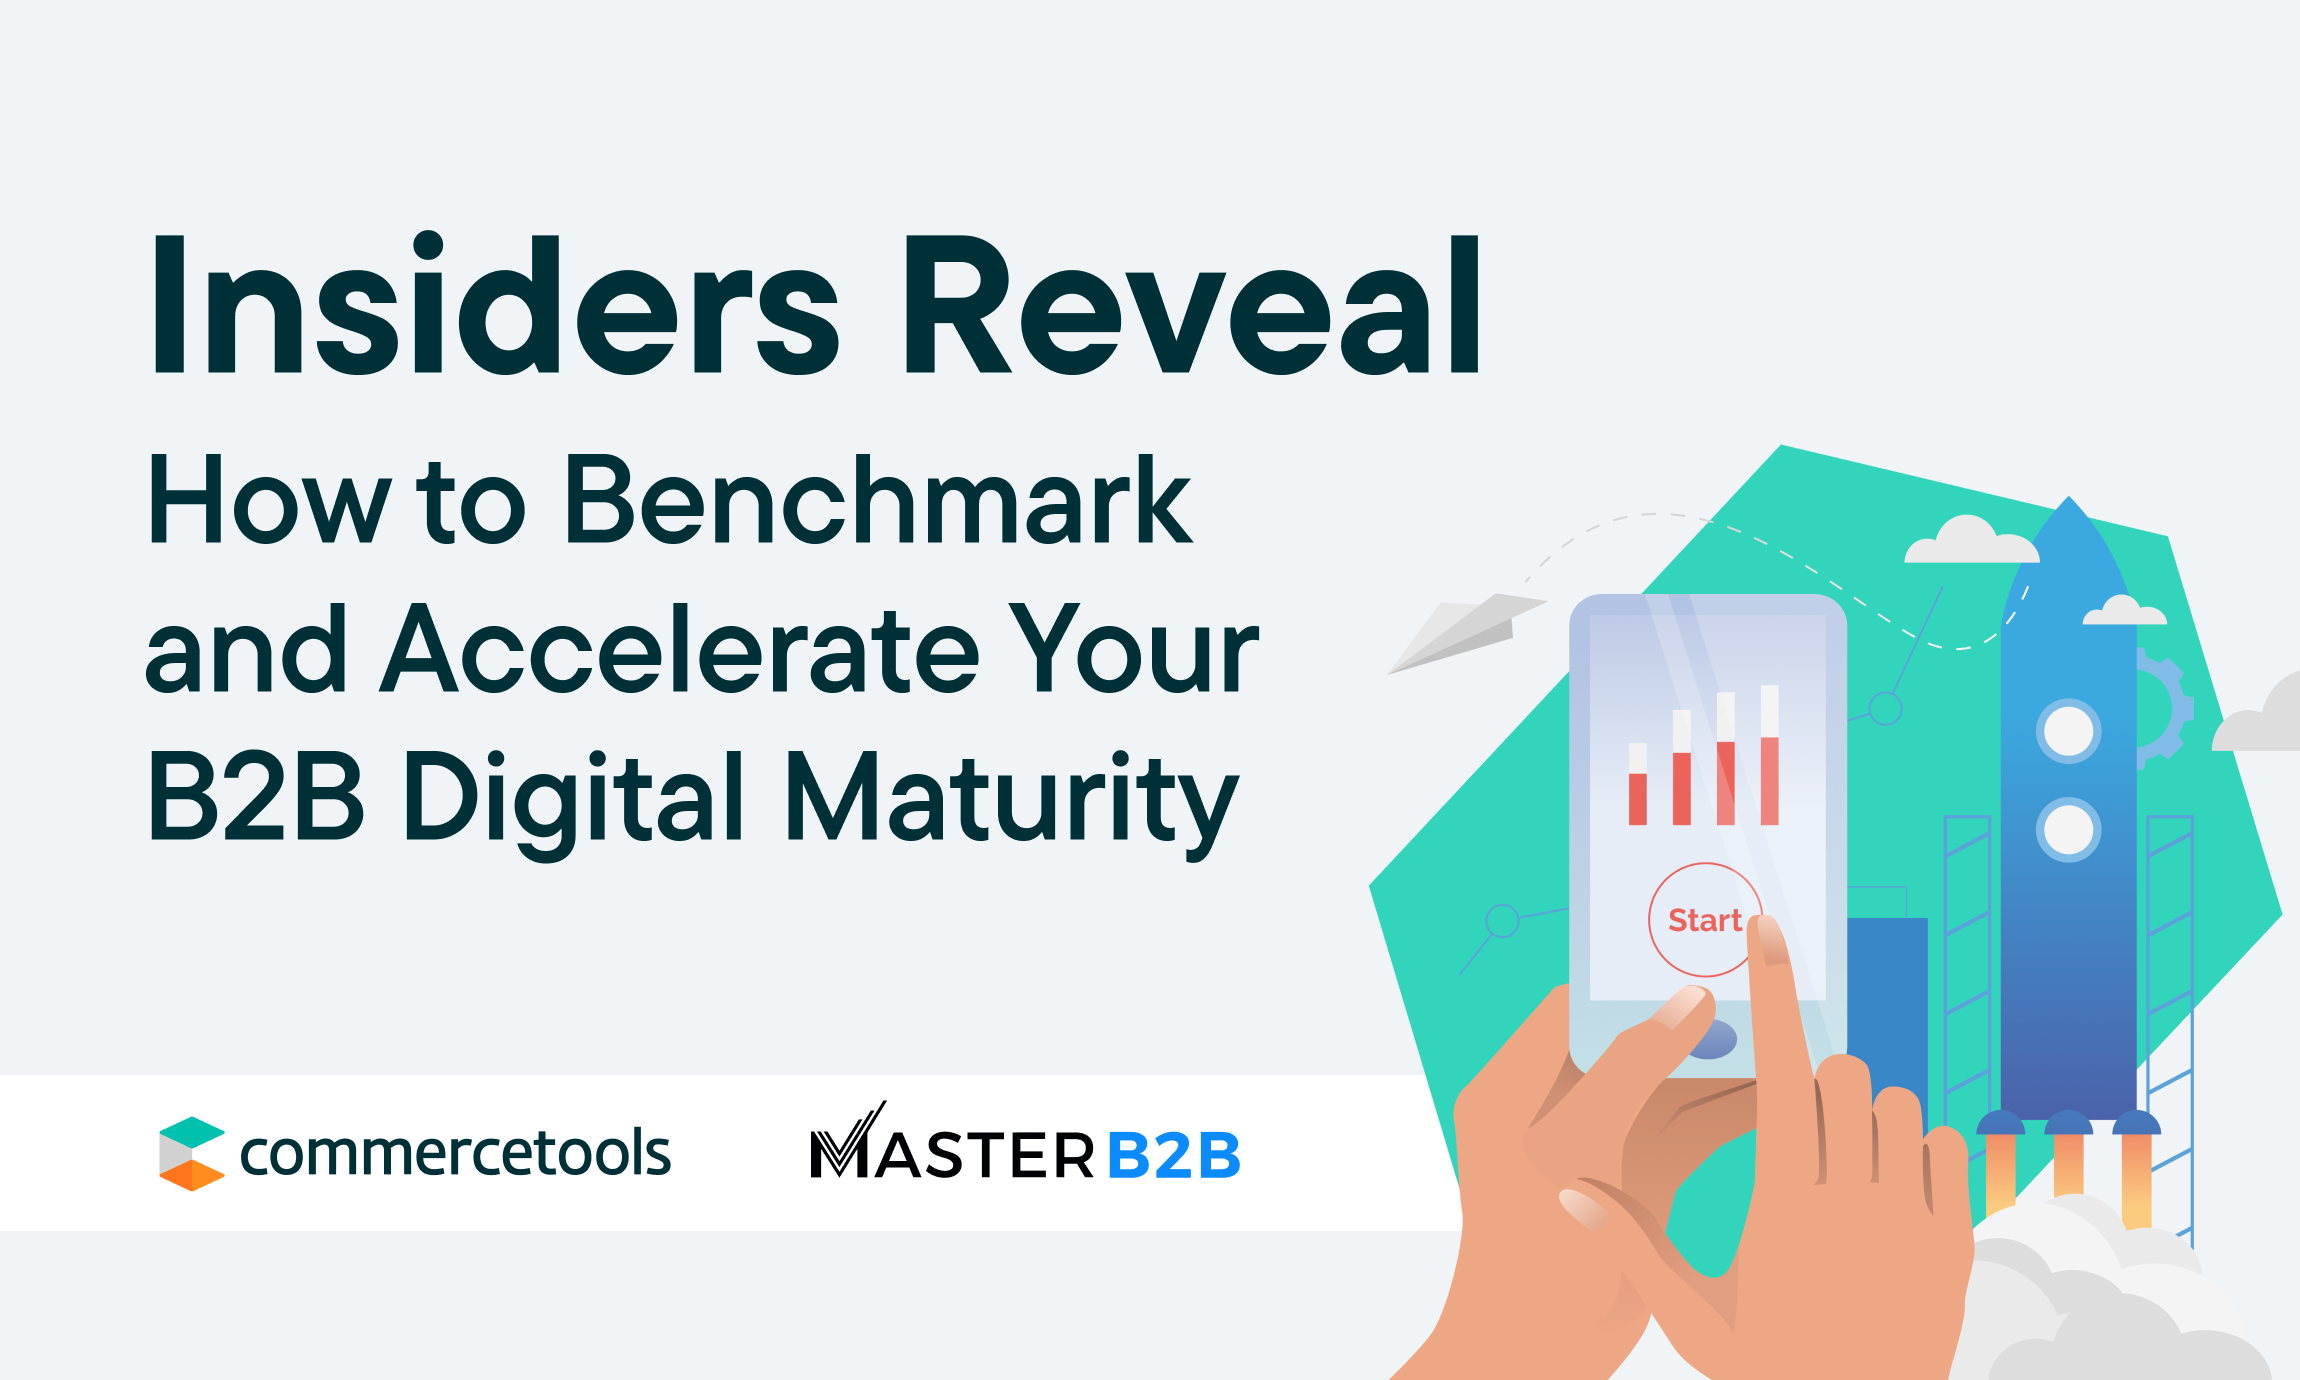 How to accelerate your B2B digital maturity